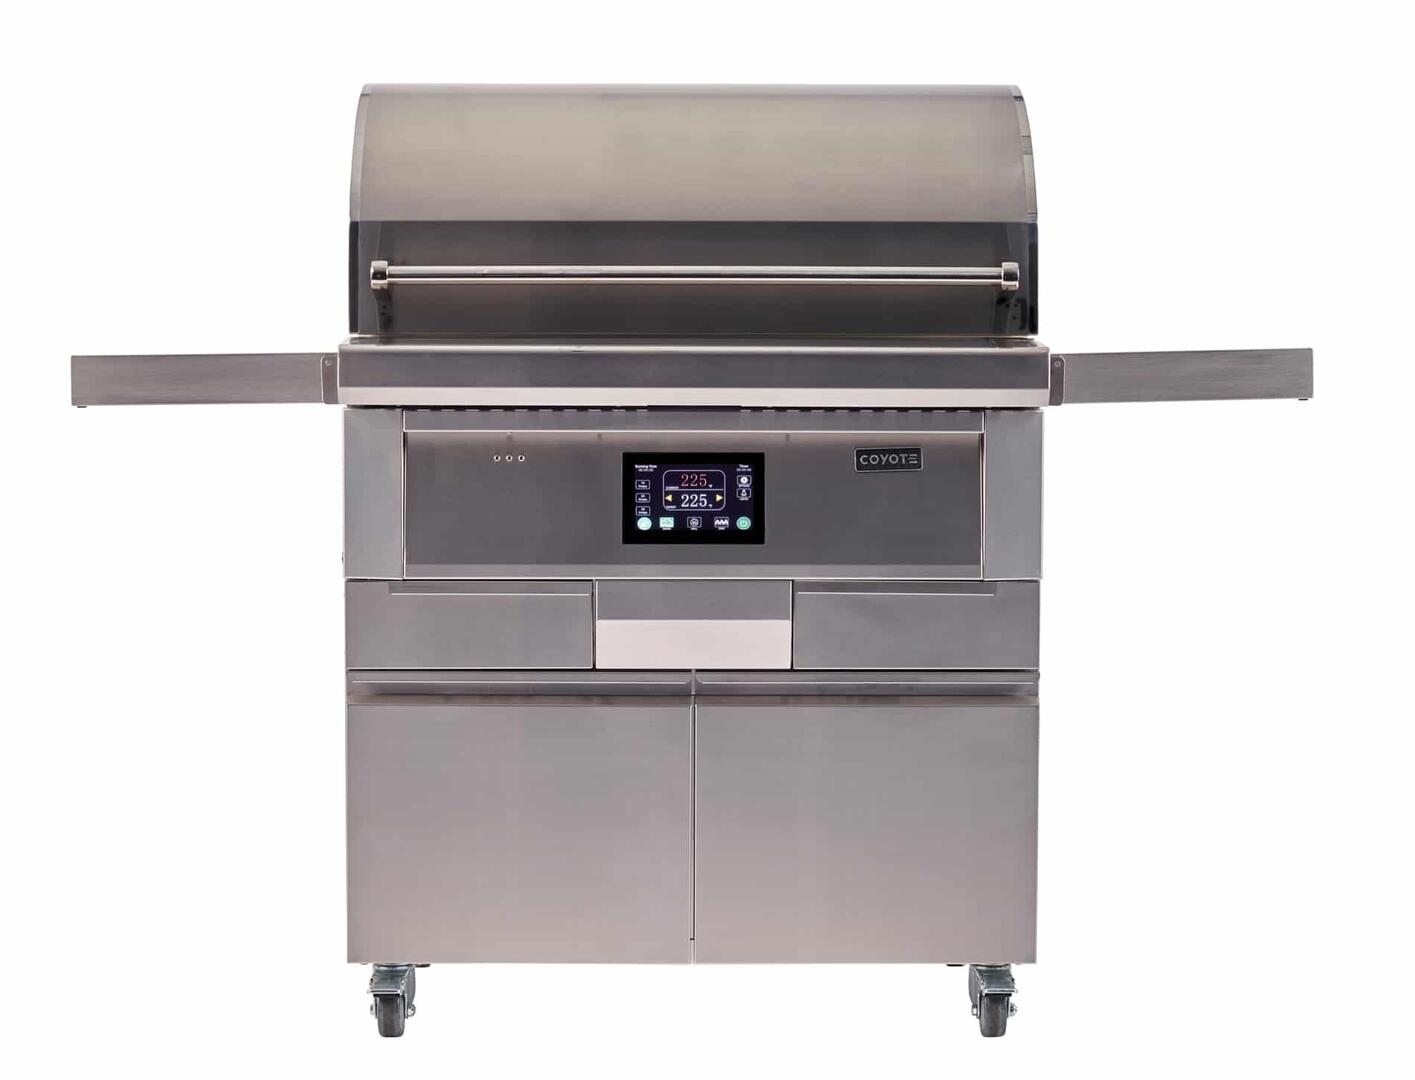 28 Inch Freestanding Pellet Grill with 800 sq. inches Grilling Surface Size, Warming Rack, Side Table, in Stainless Steel - C1P28-FS